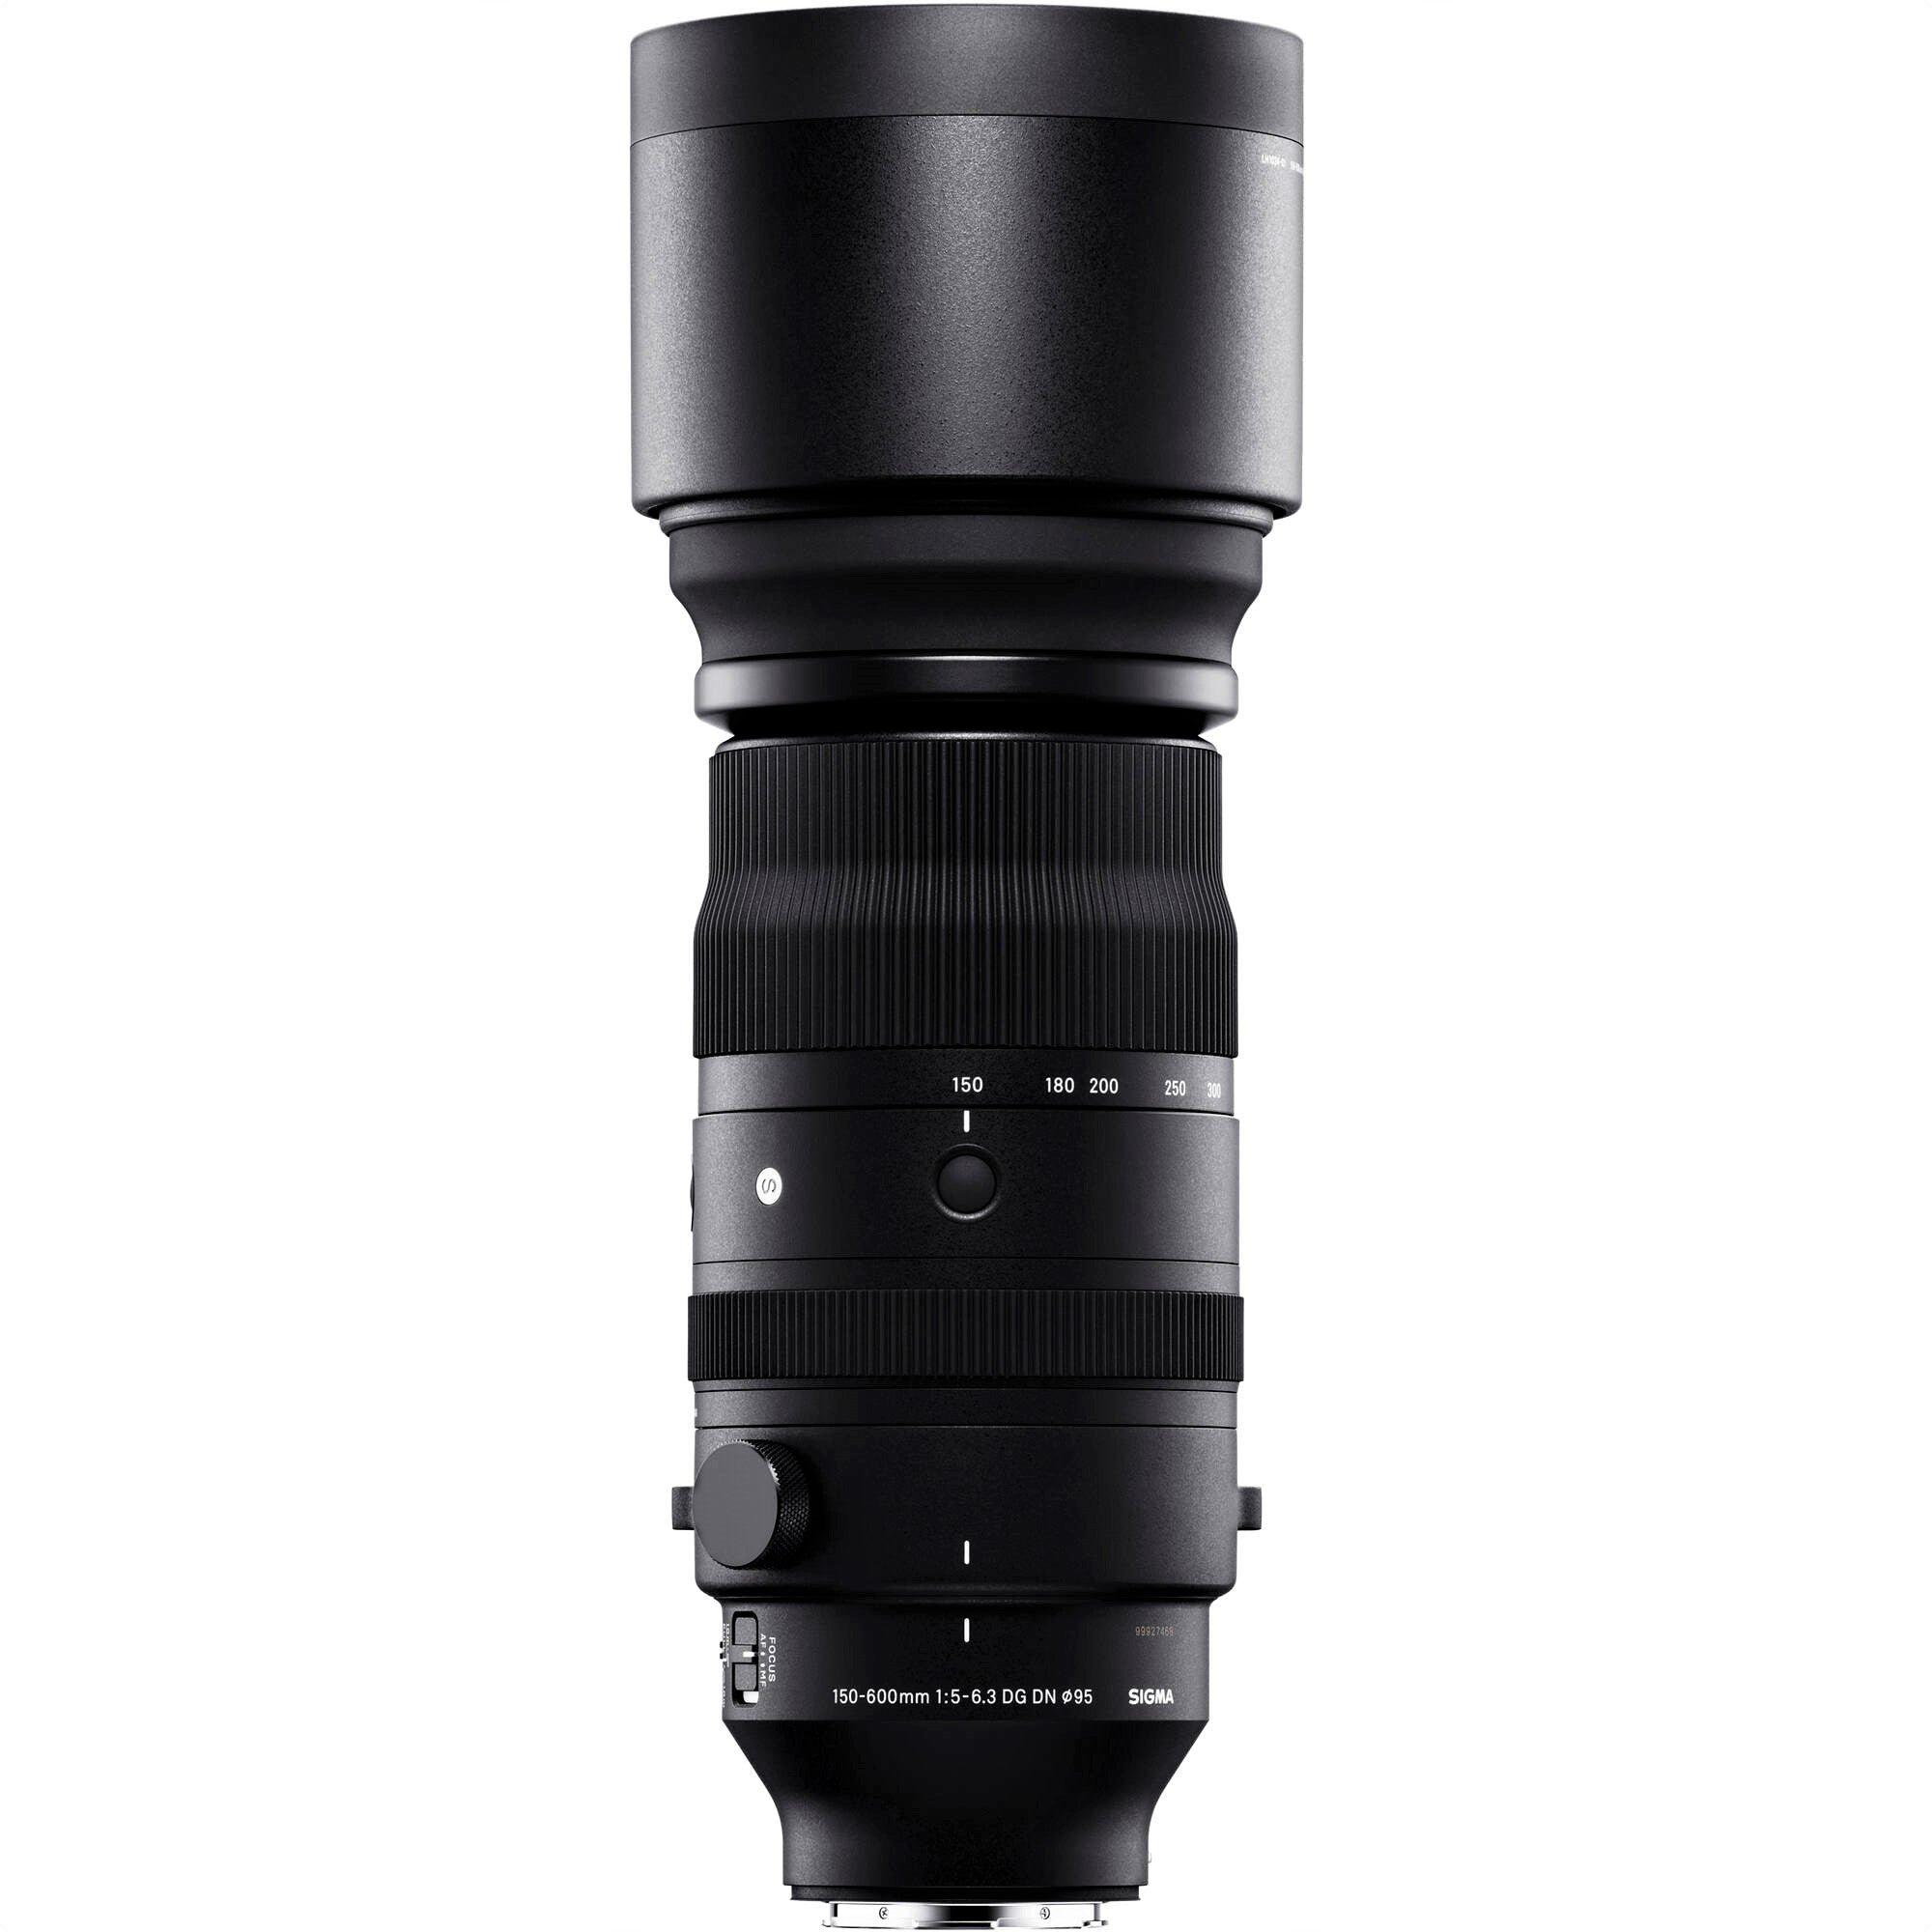 Sigma Lens Hood Attached to 150-600mm F5-6.3 DG DN OS Sports Lens